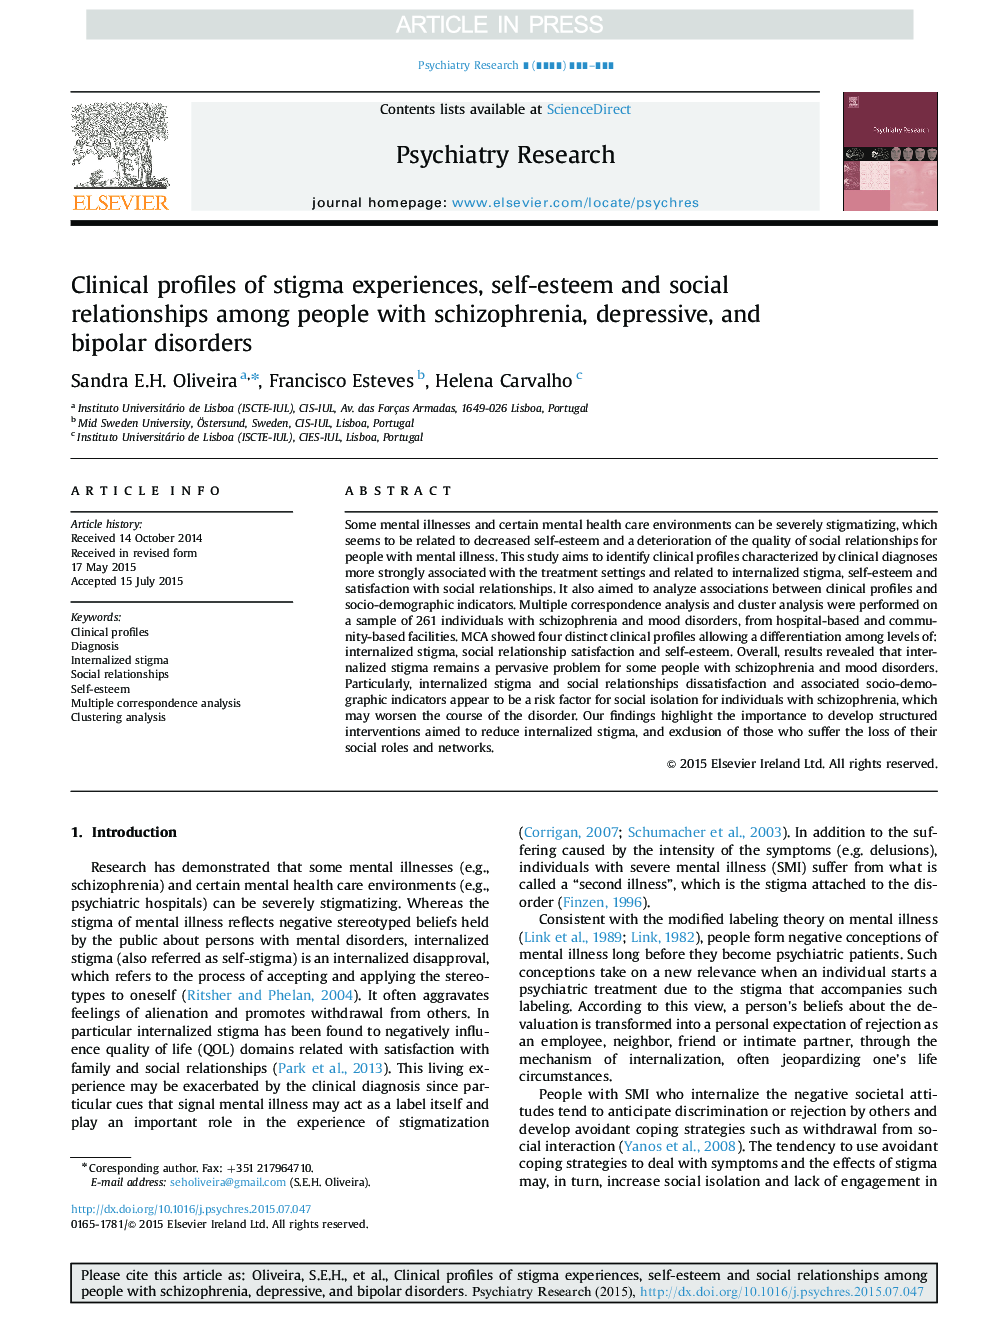 Clinical profiles of stigma experiences, self-esteem and social relationships among people with schizophrenia, depressive, and bipolar disorders